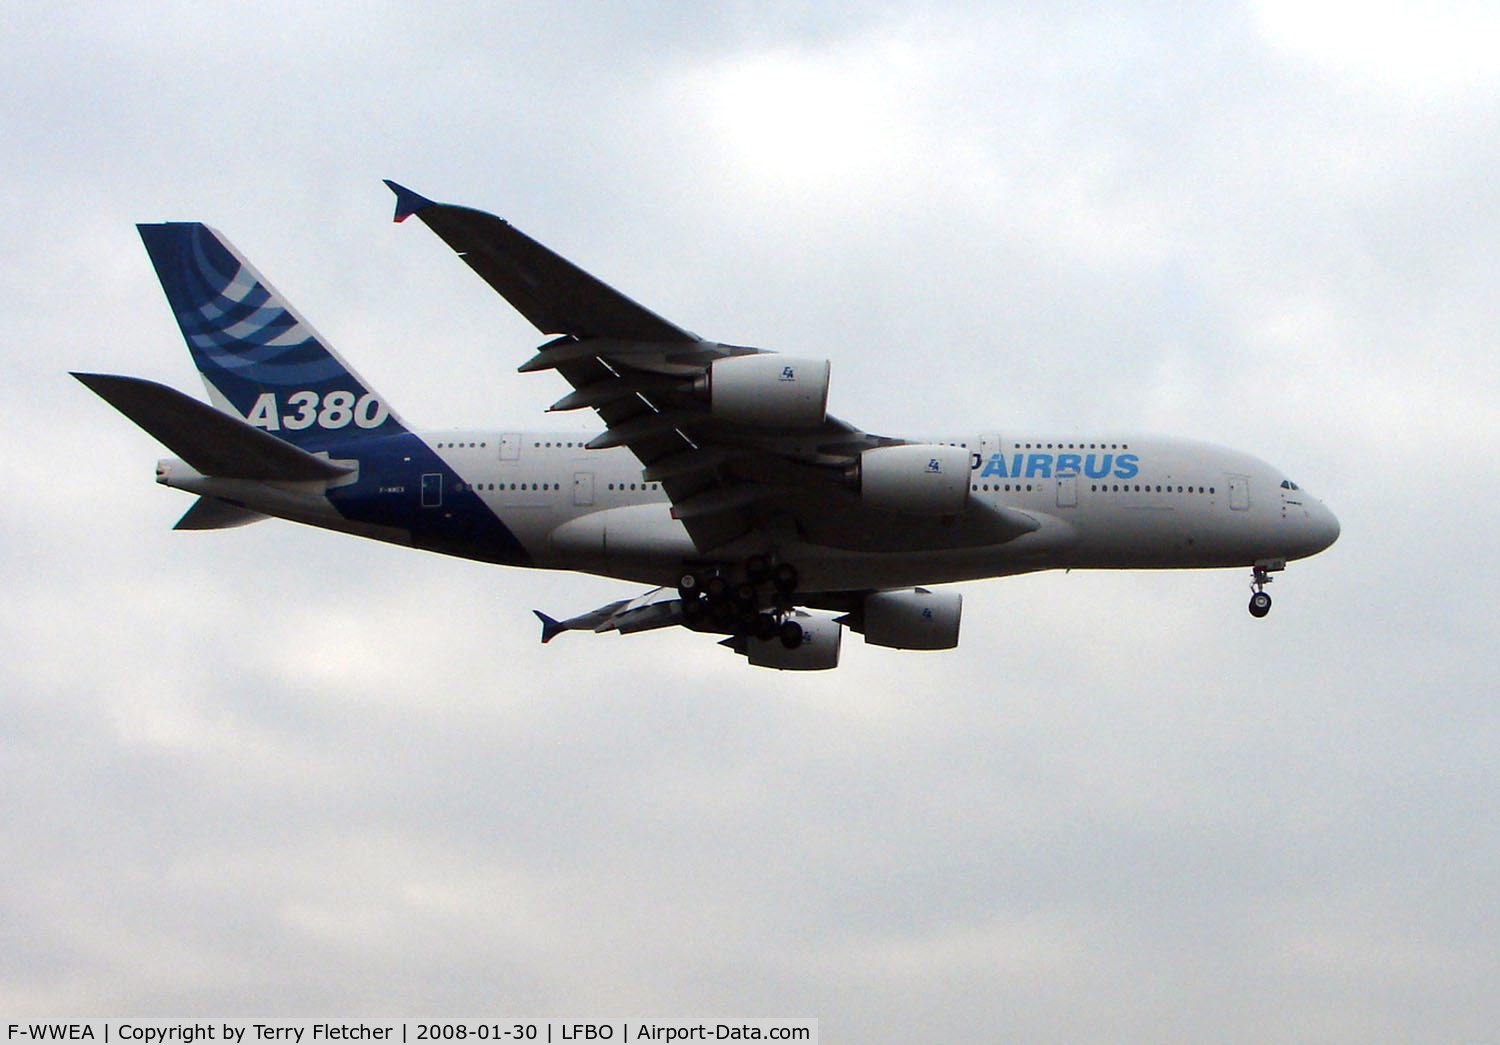 F-WWEA, 2006 Airbus A380-861 C/N 009, Test flying at its Toulouse base in France